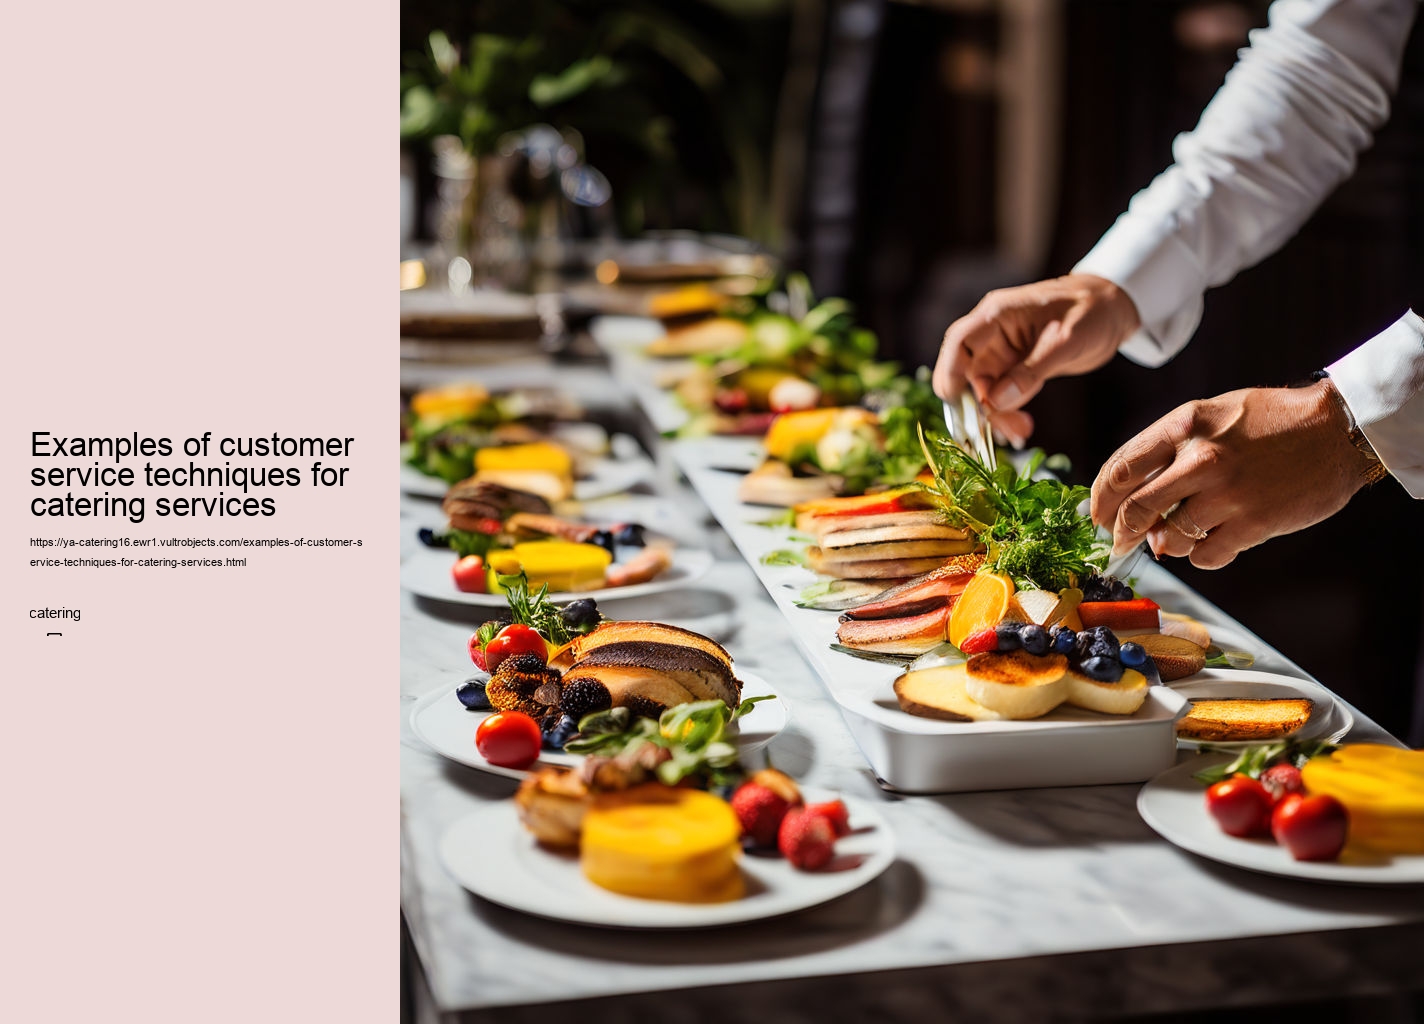 Examples of customer service techniques for catering services